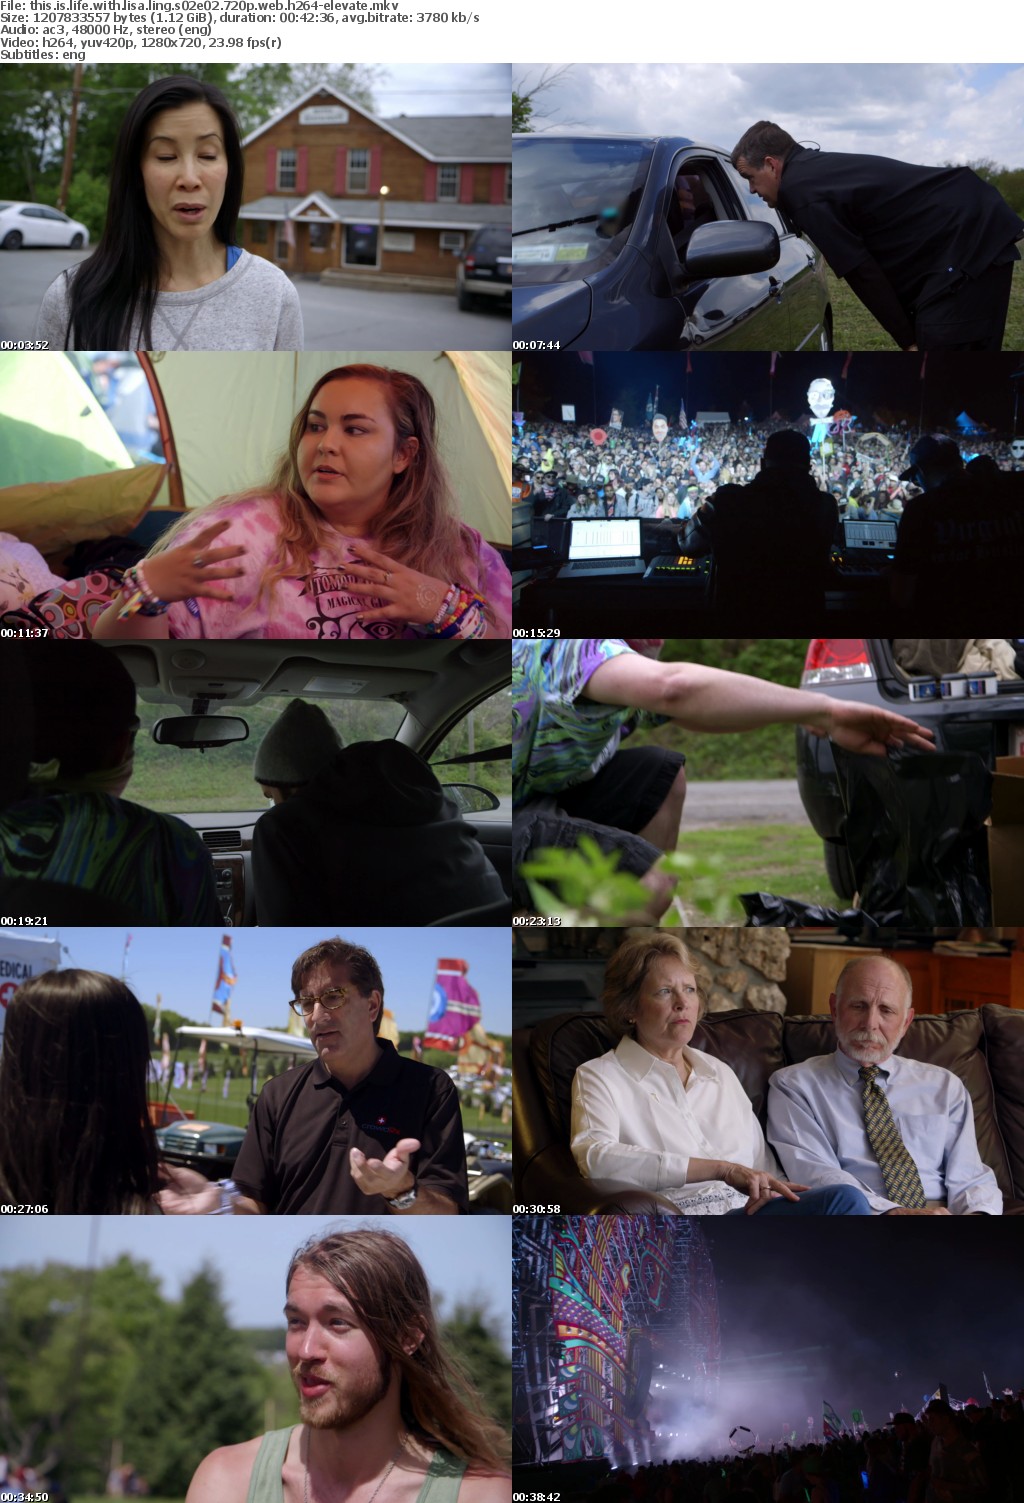 This Is Life with Lisa Ling S02E02 720p WEB h264-ELEVATE